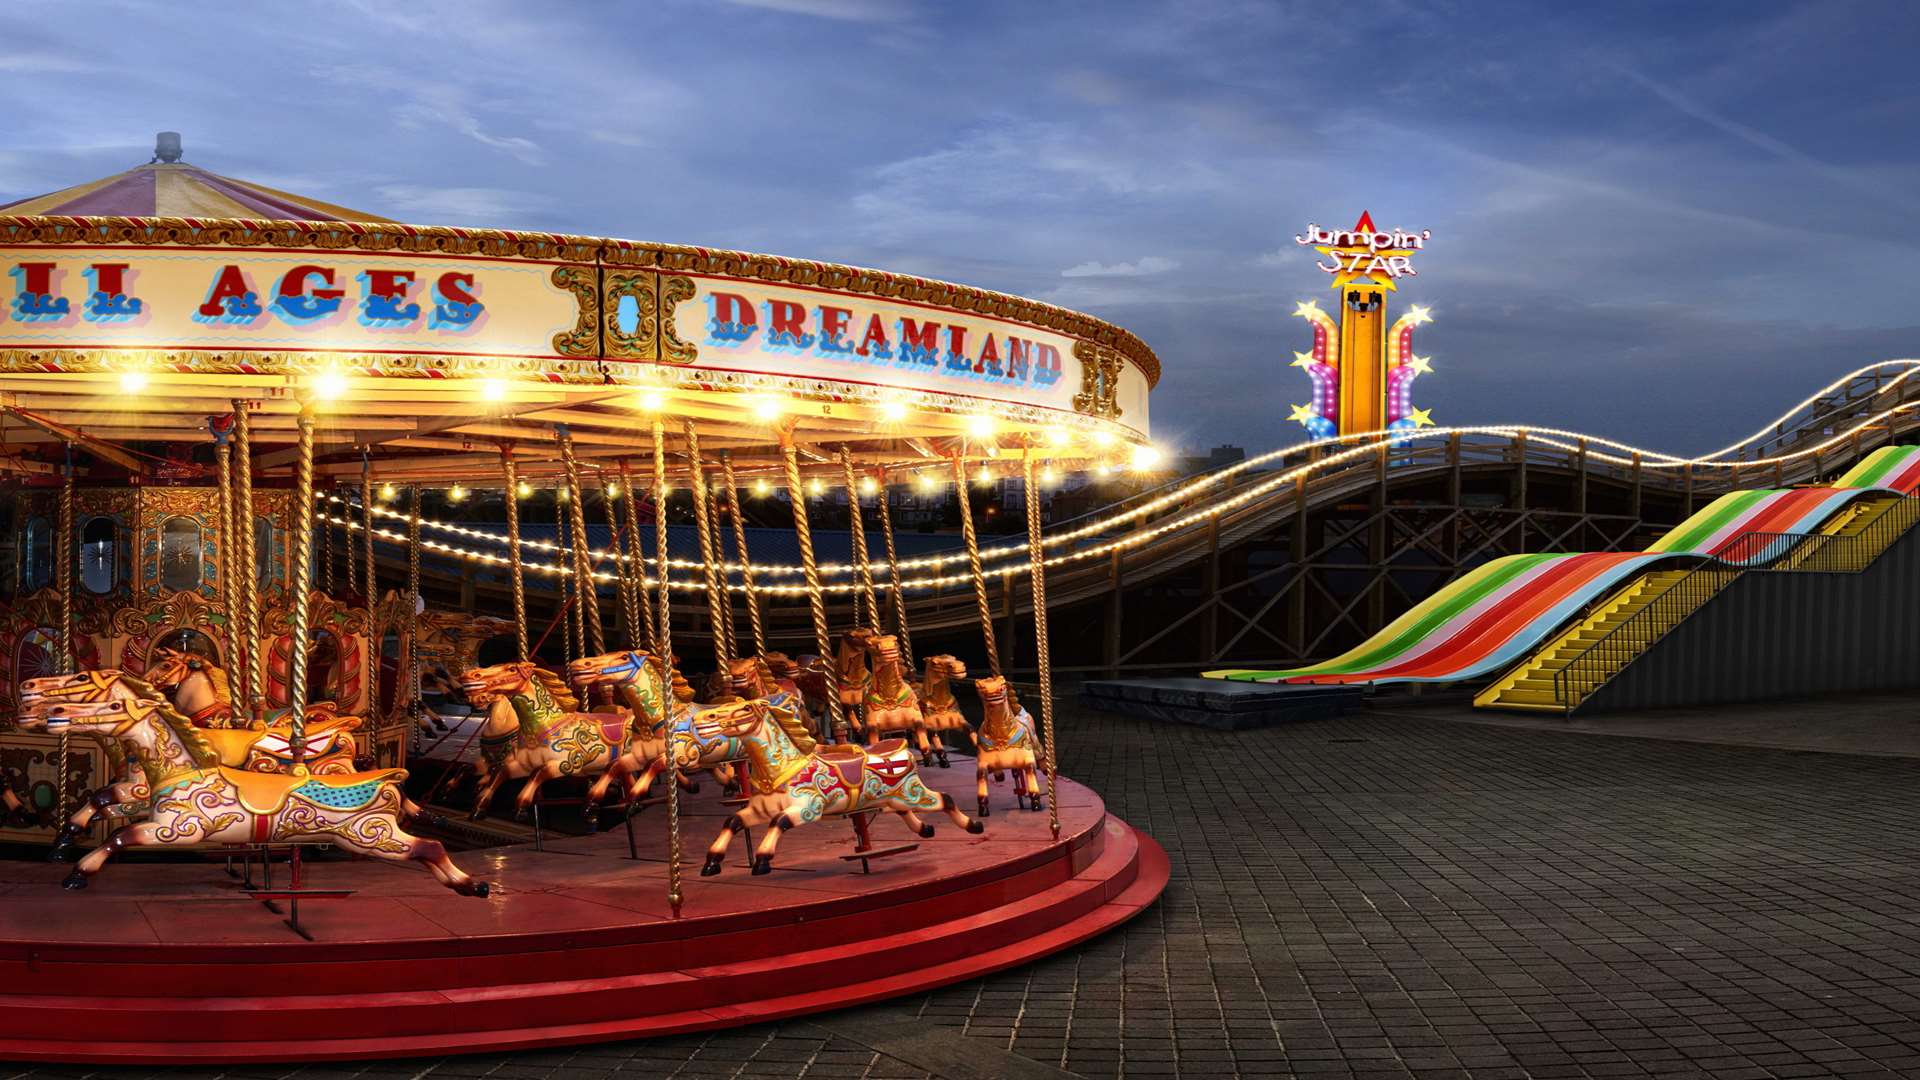 Dreamland launched a discounted twilight ticket at the attraction